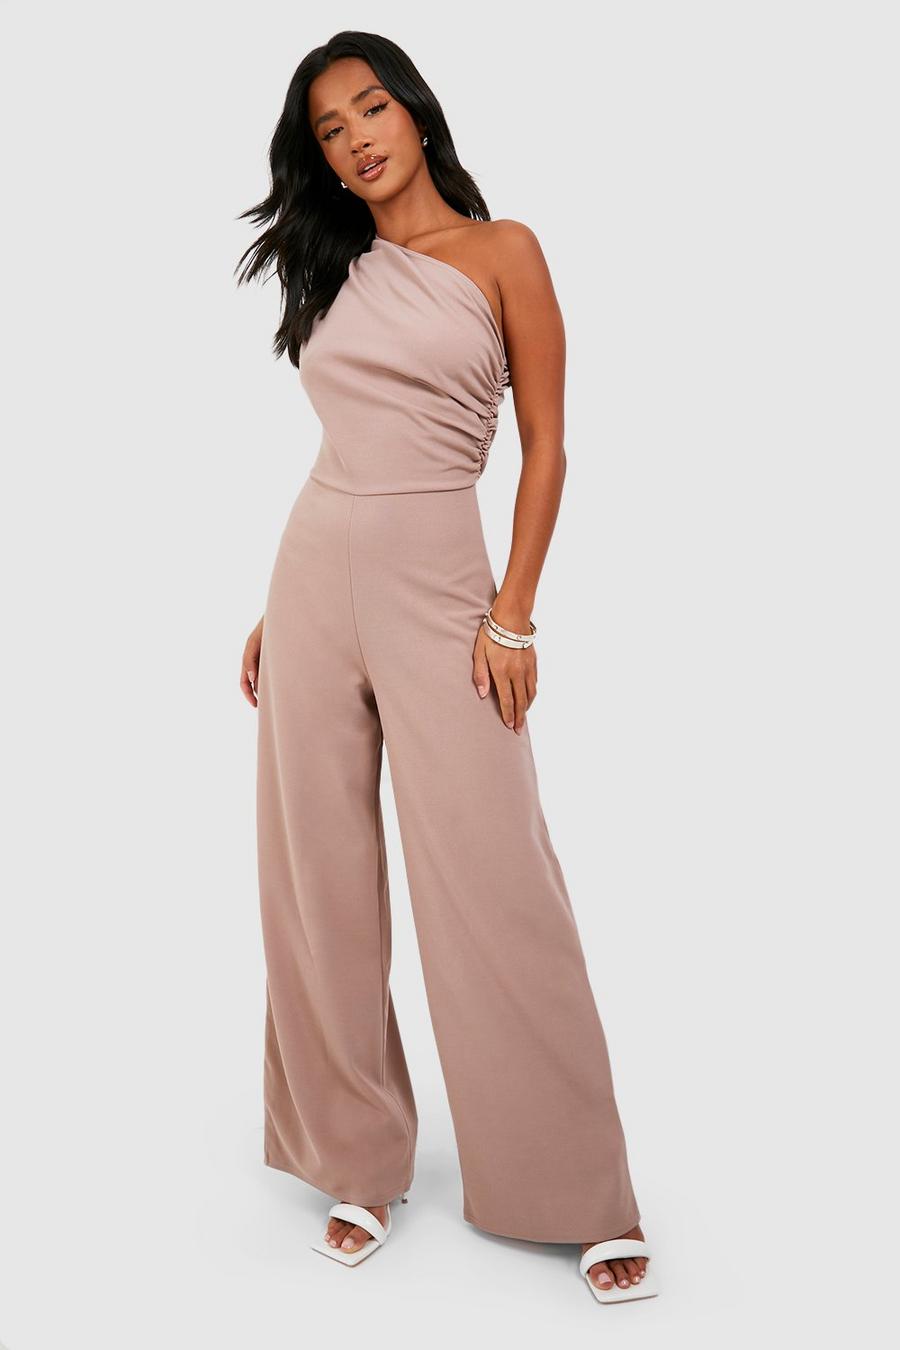 Occasionwear Jumpsuits & Playsuits